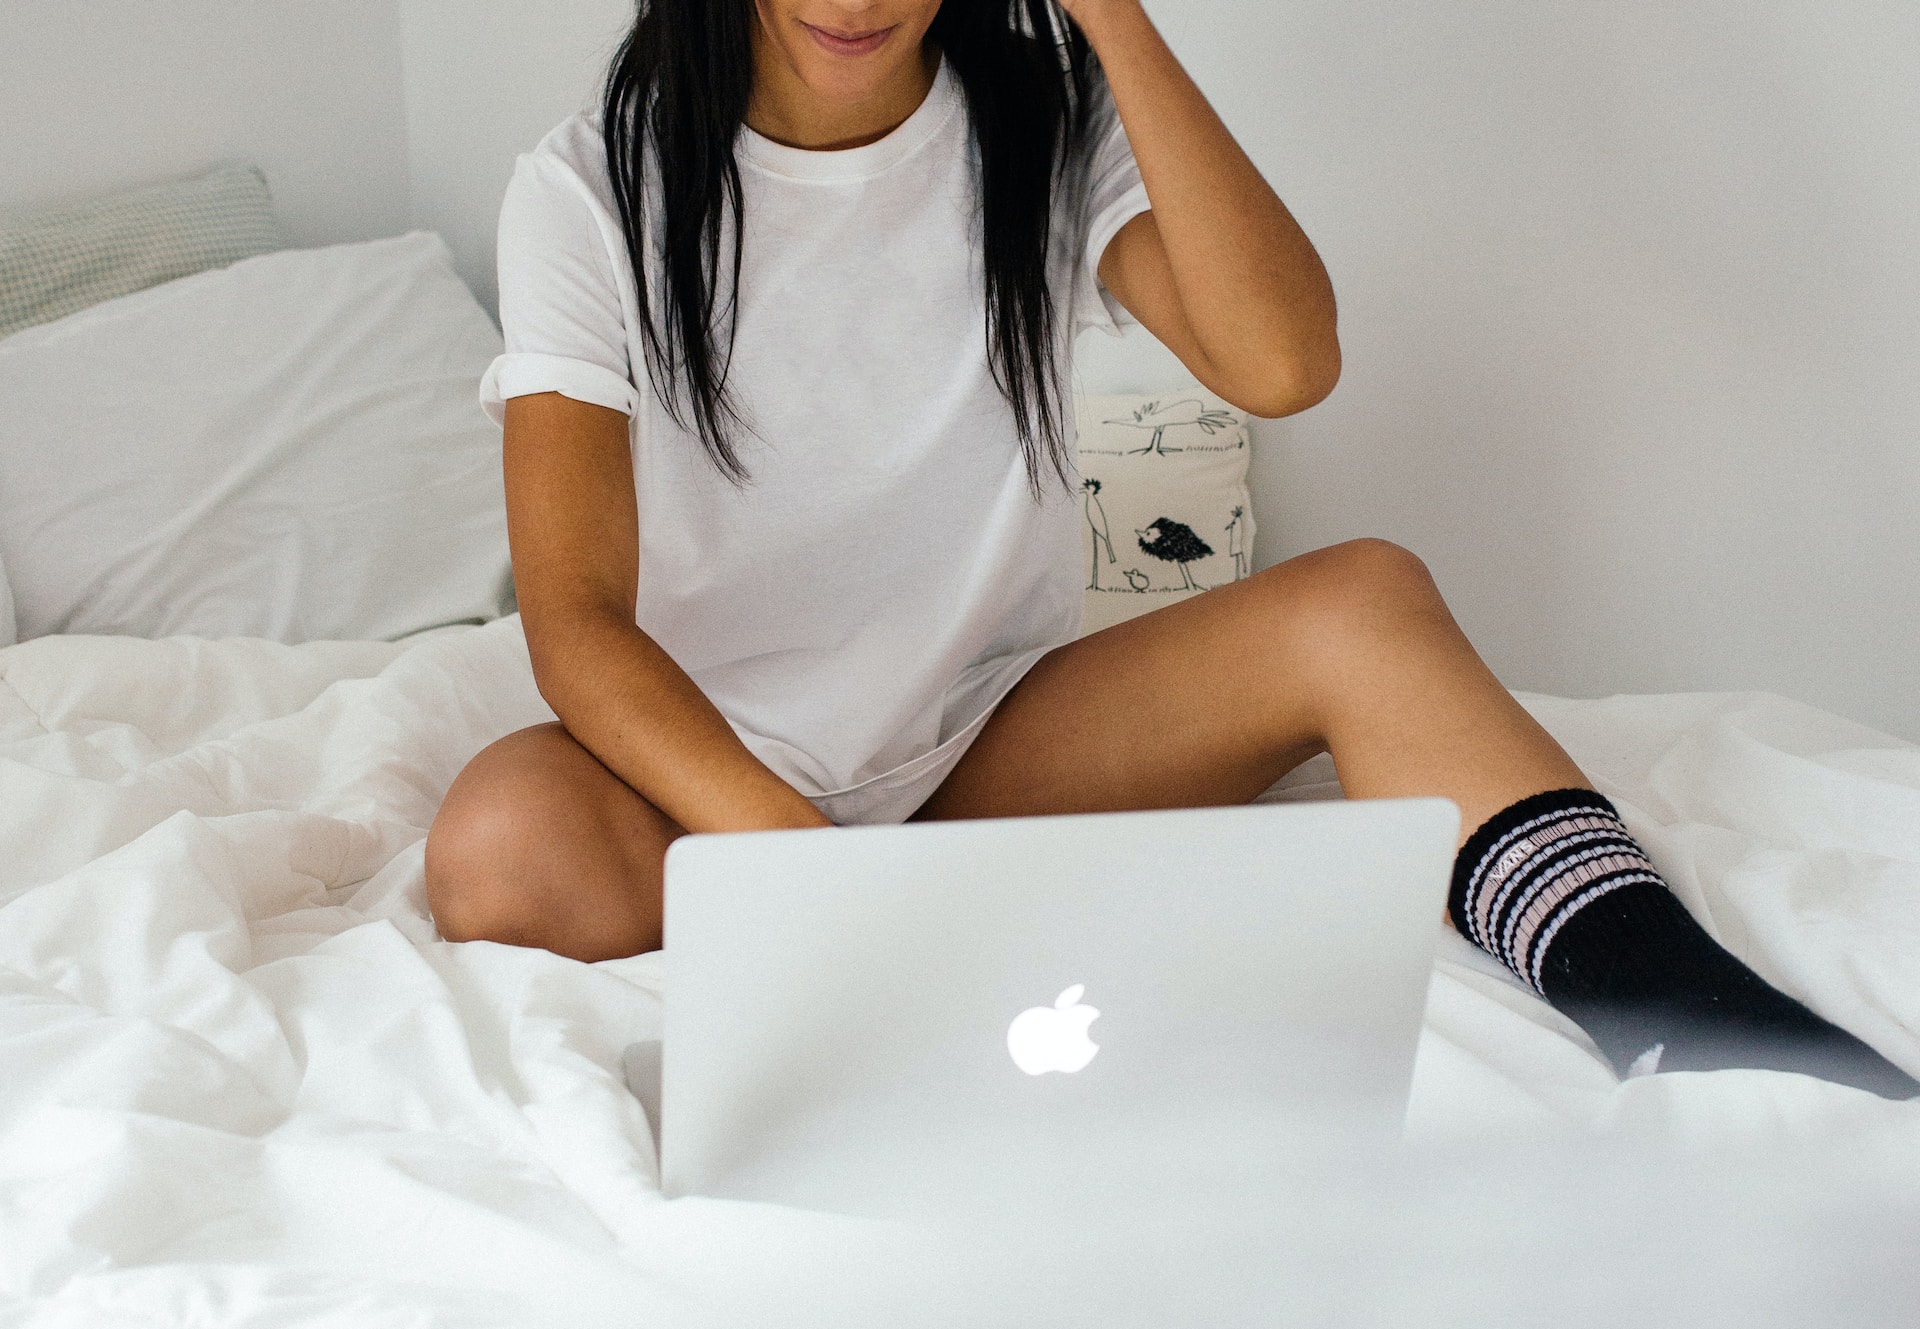 Women wearing a white t-shirt, sitting on a bed, using an imac